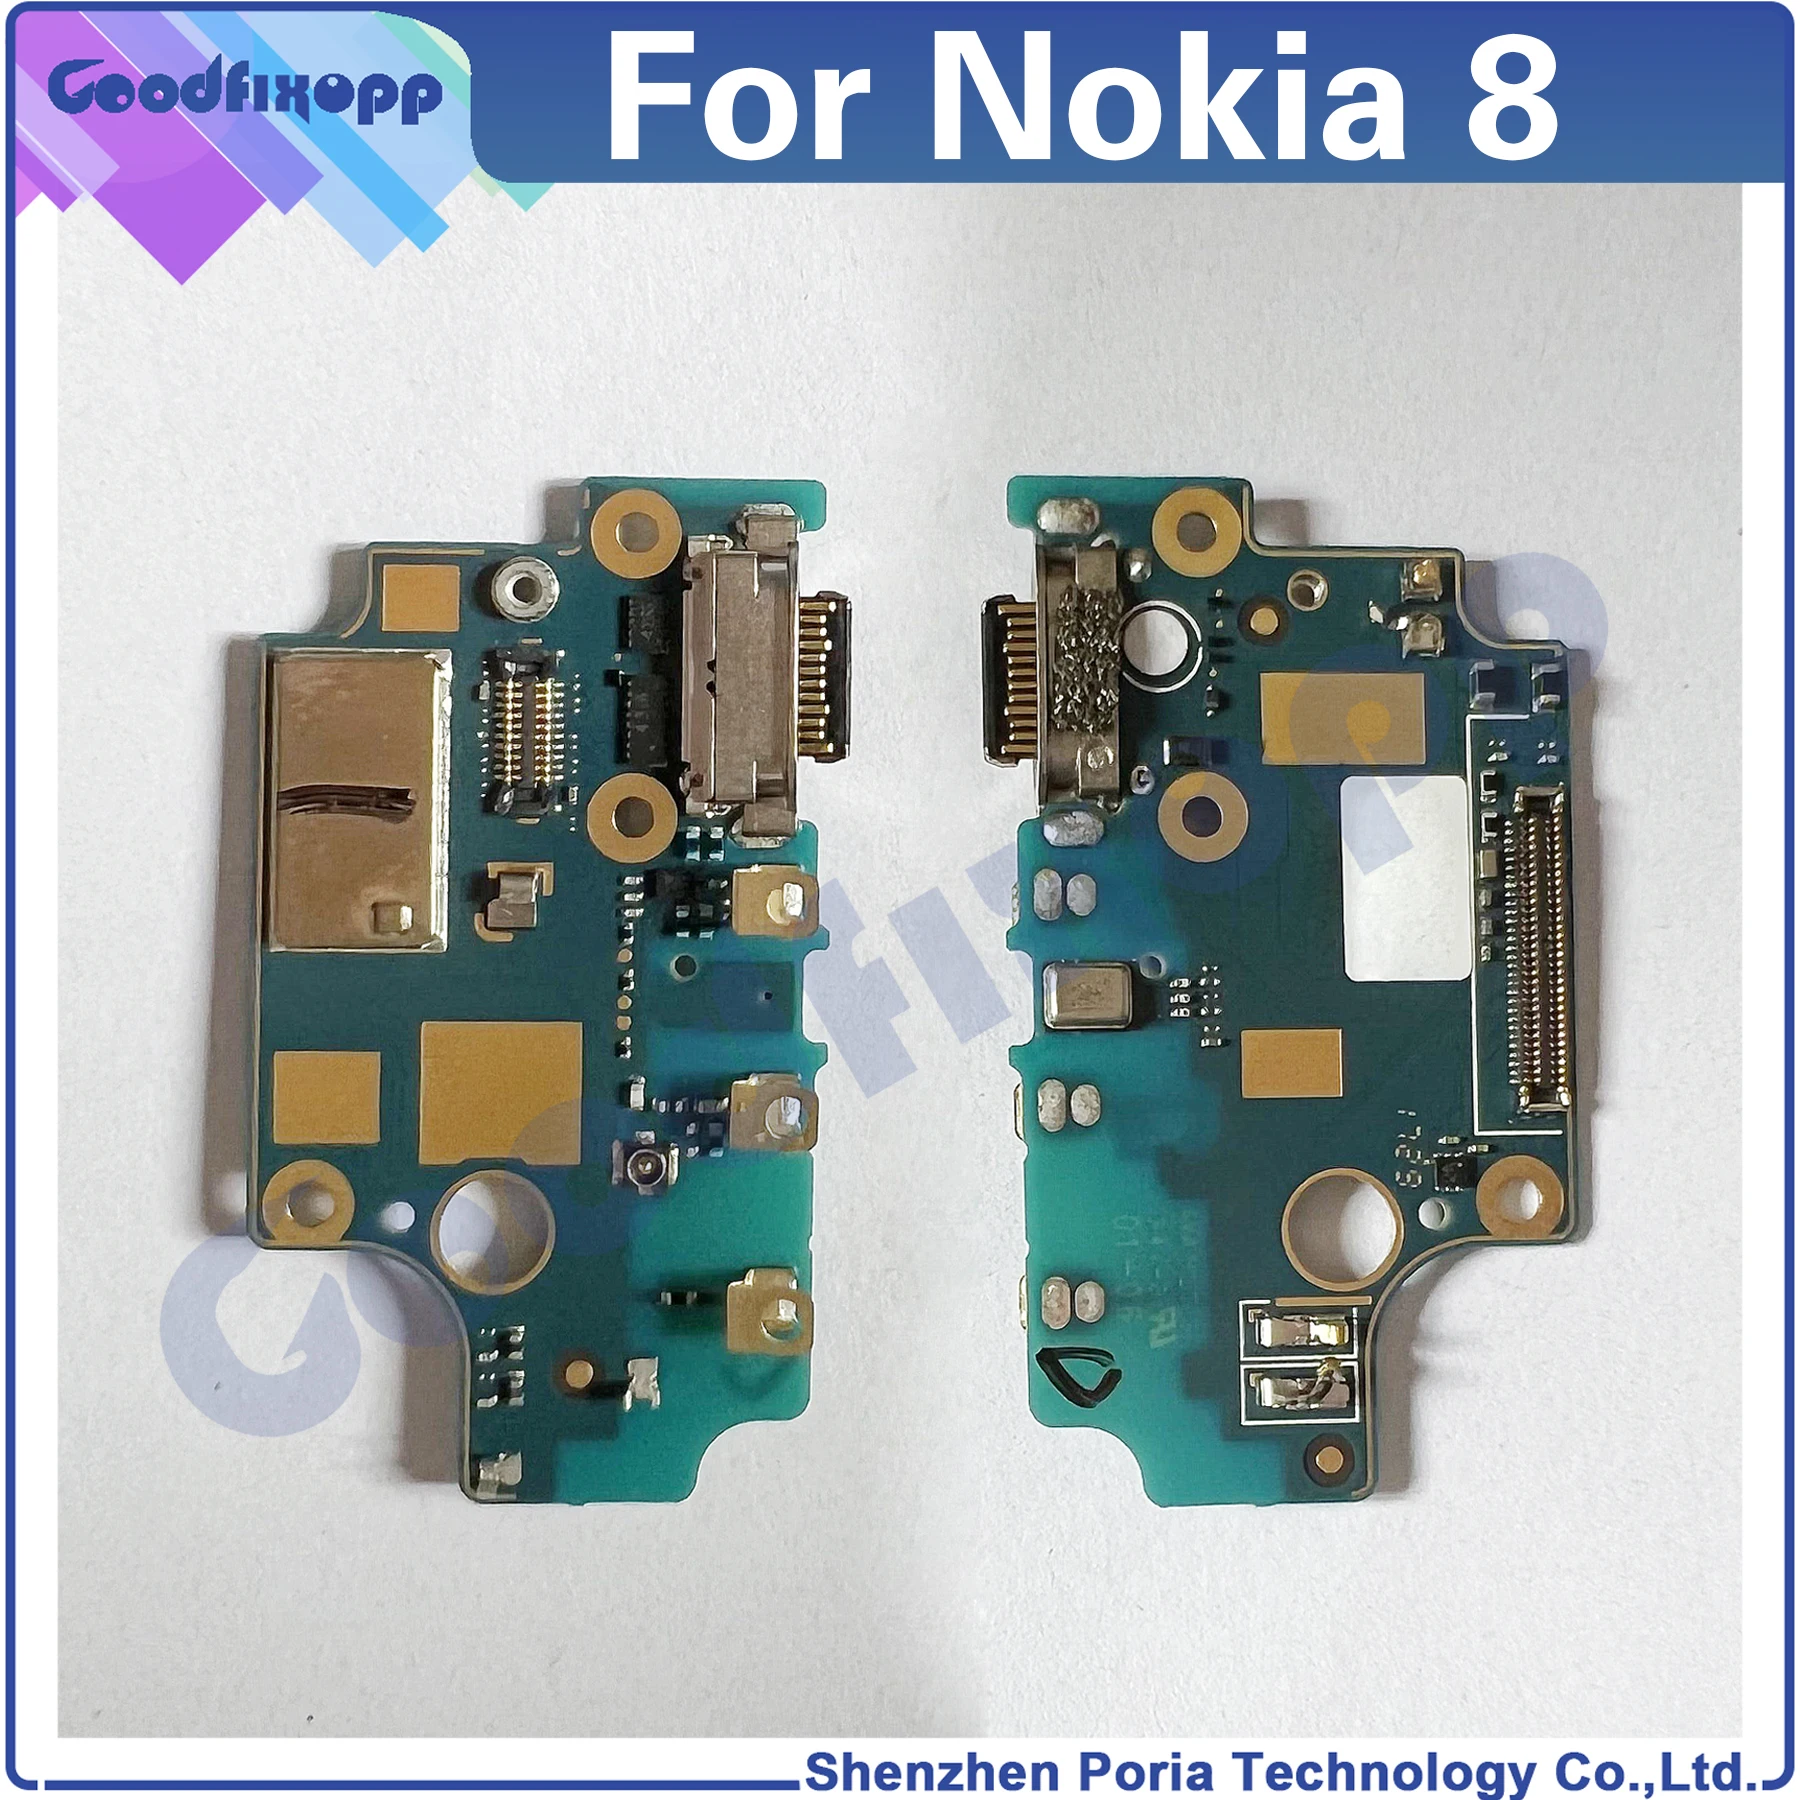 For Nokia8 Charging Port For Nokia 8 TA-1004 TA-1012 TA-1052 ​Micro USB Charger Connector Board Flex Cable Charger Dock Cable